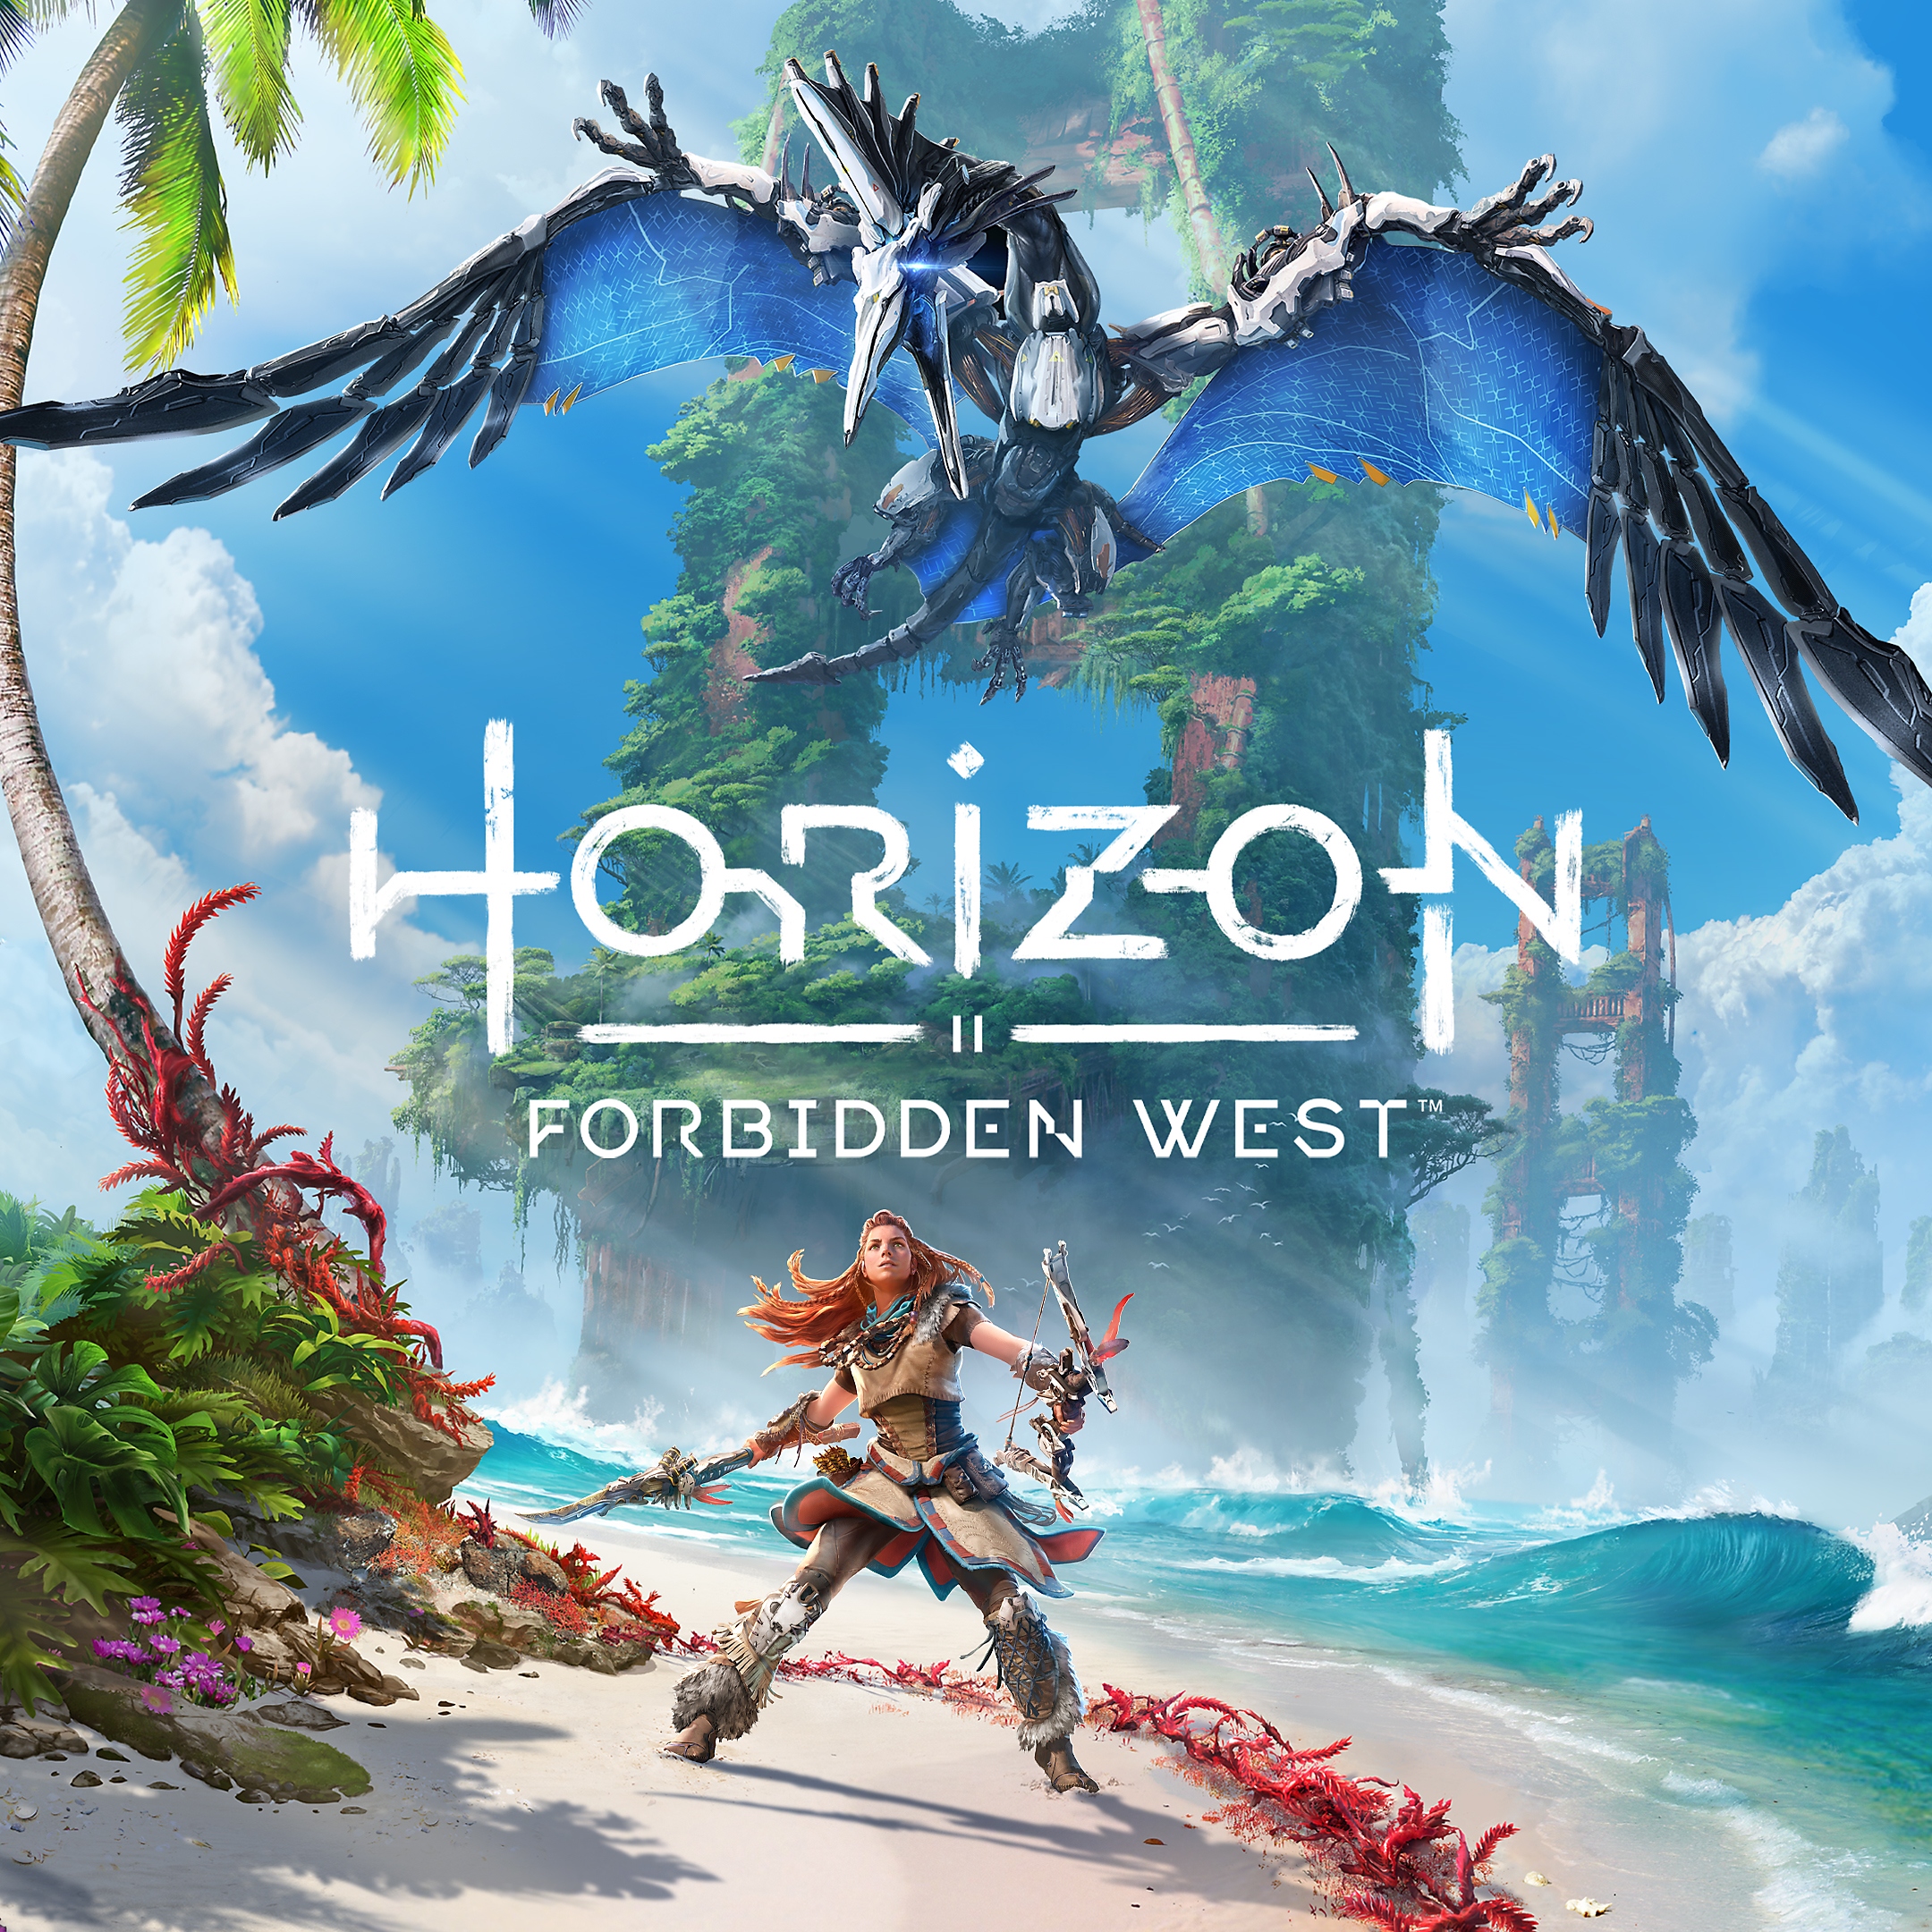 Horizon Forbidden West art showing Aloy and flying enemy